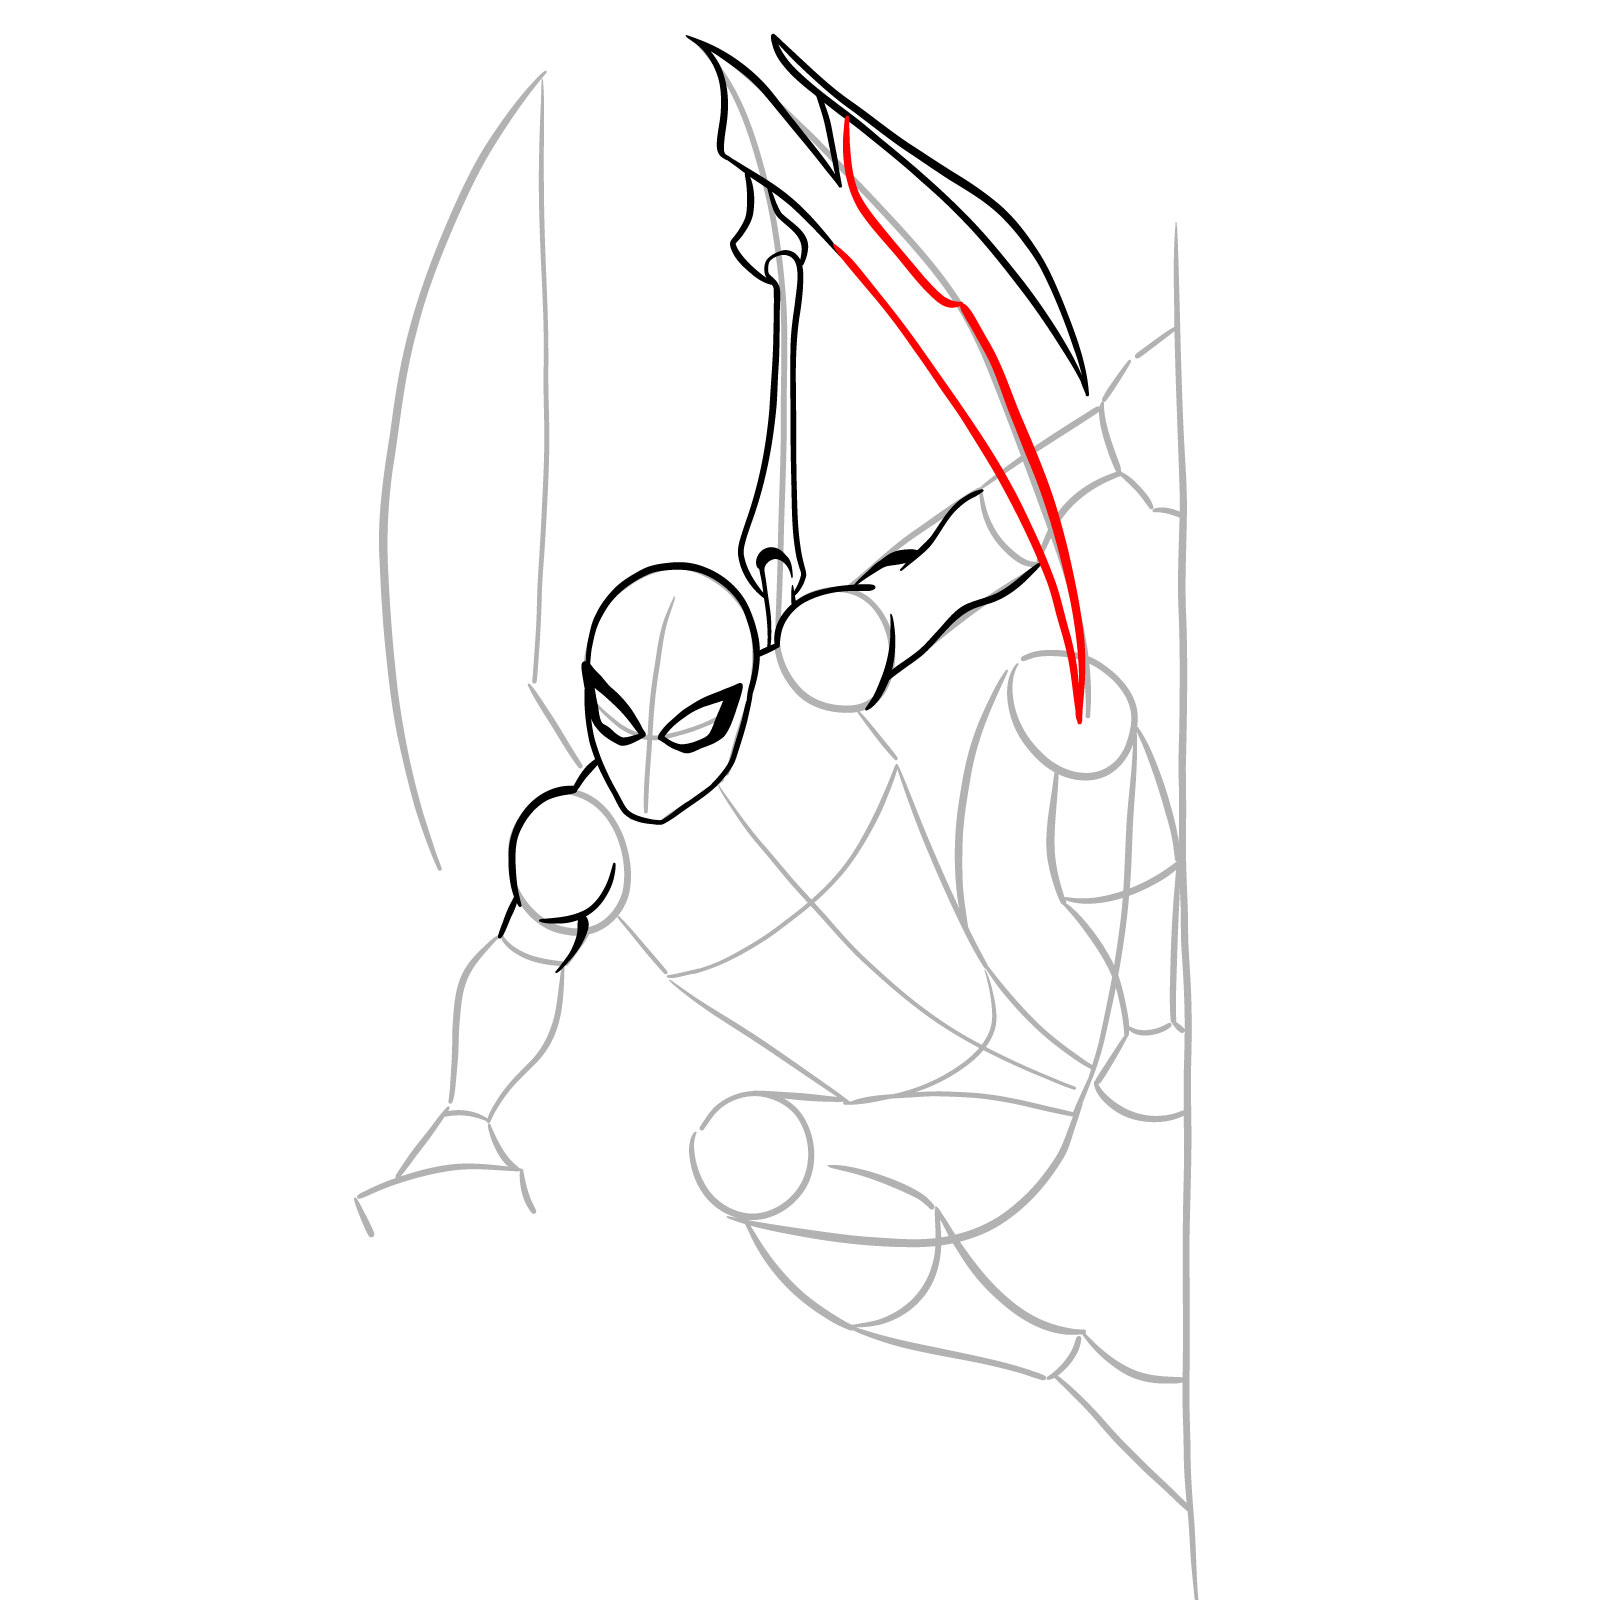 How to draw The Superior Spider-Man - step 14